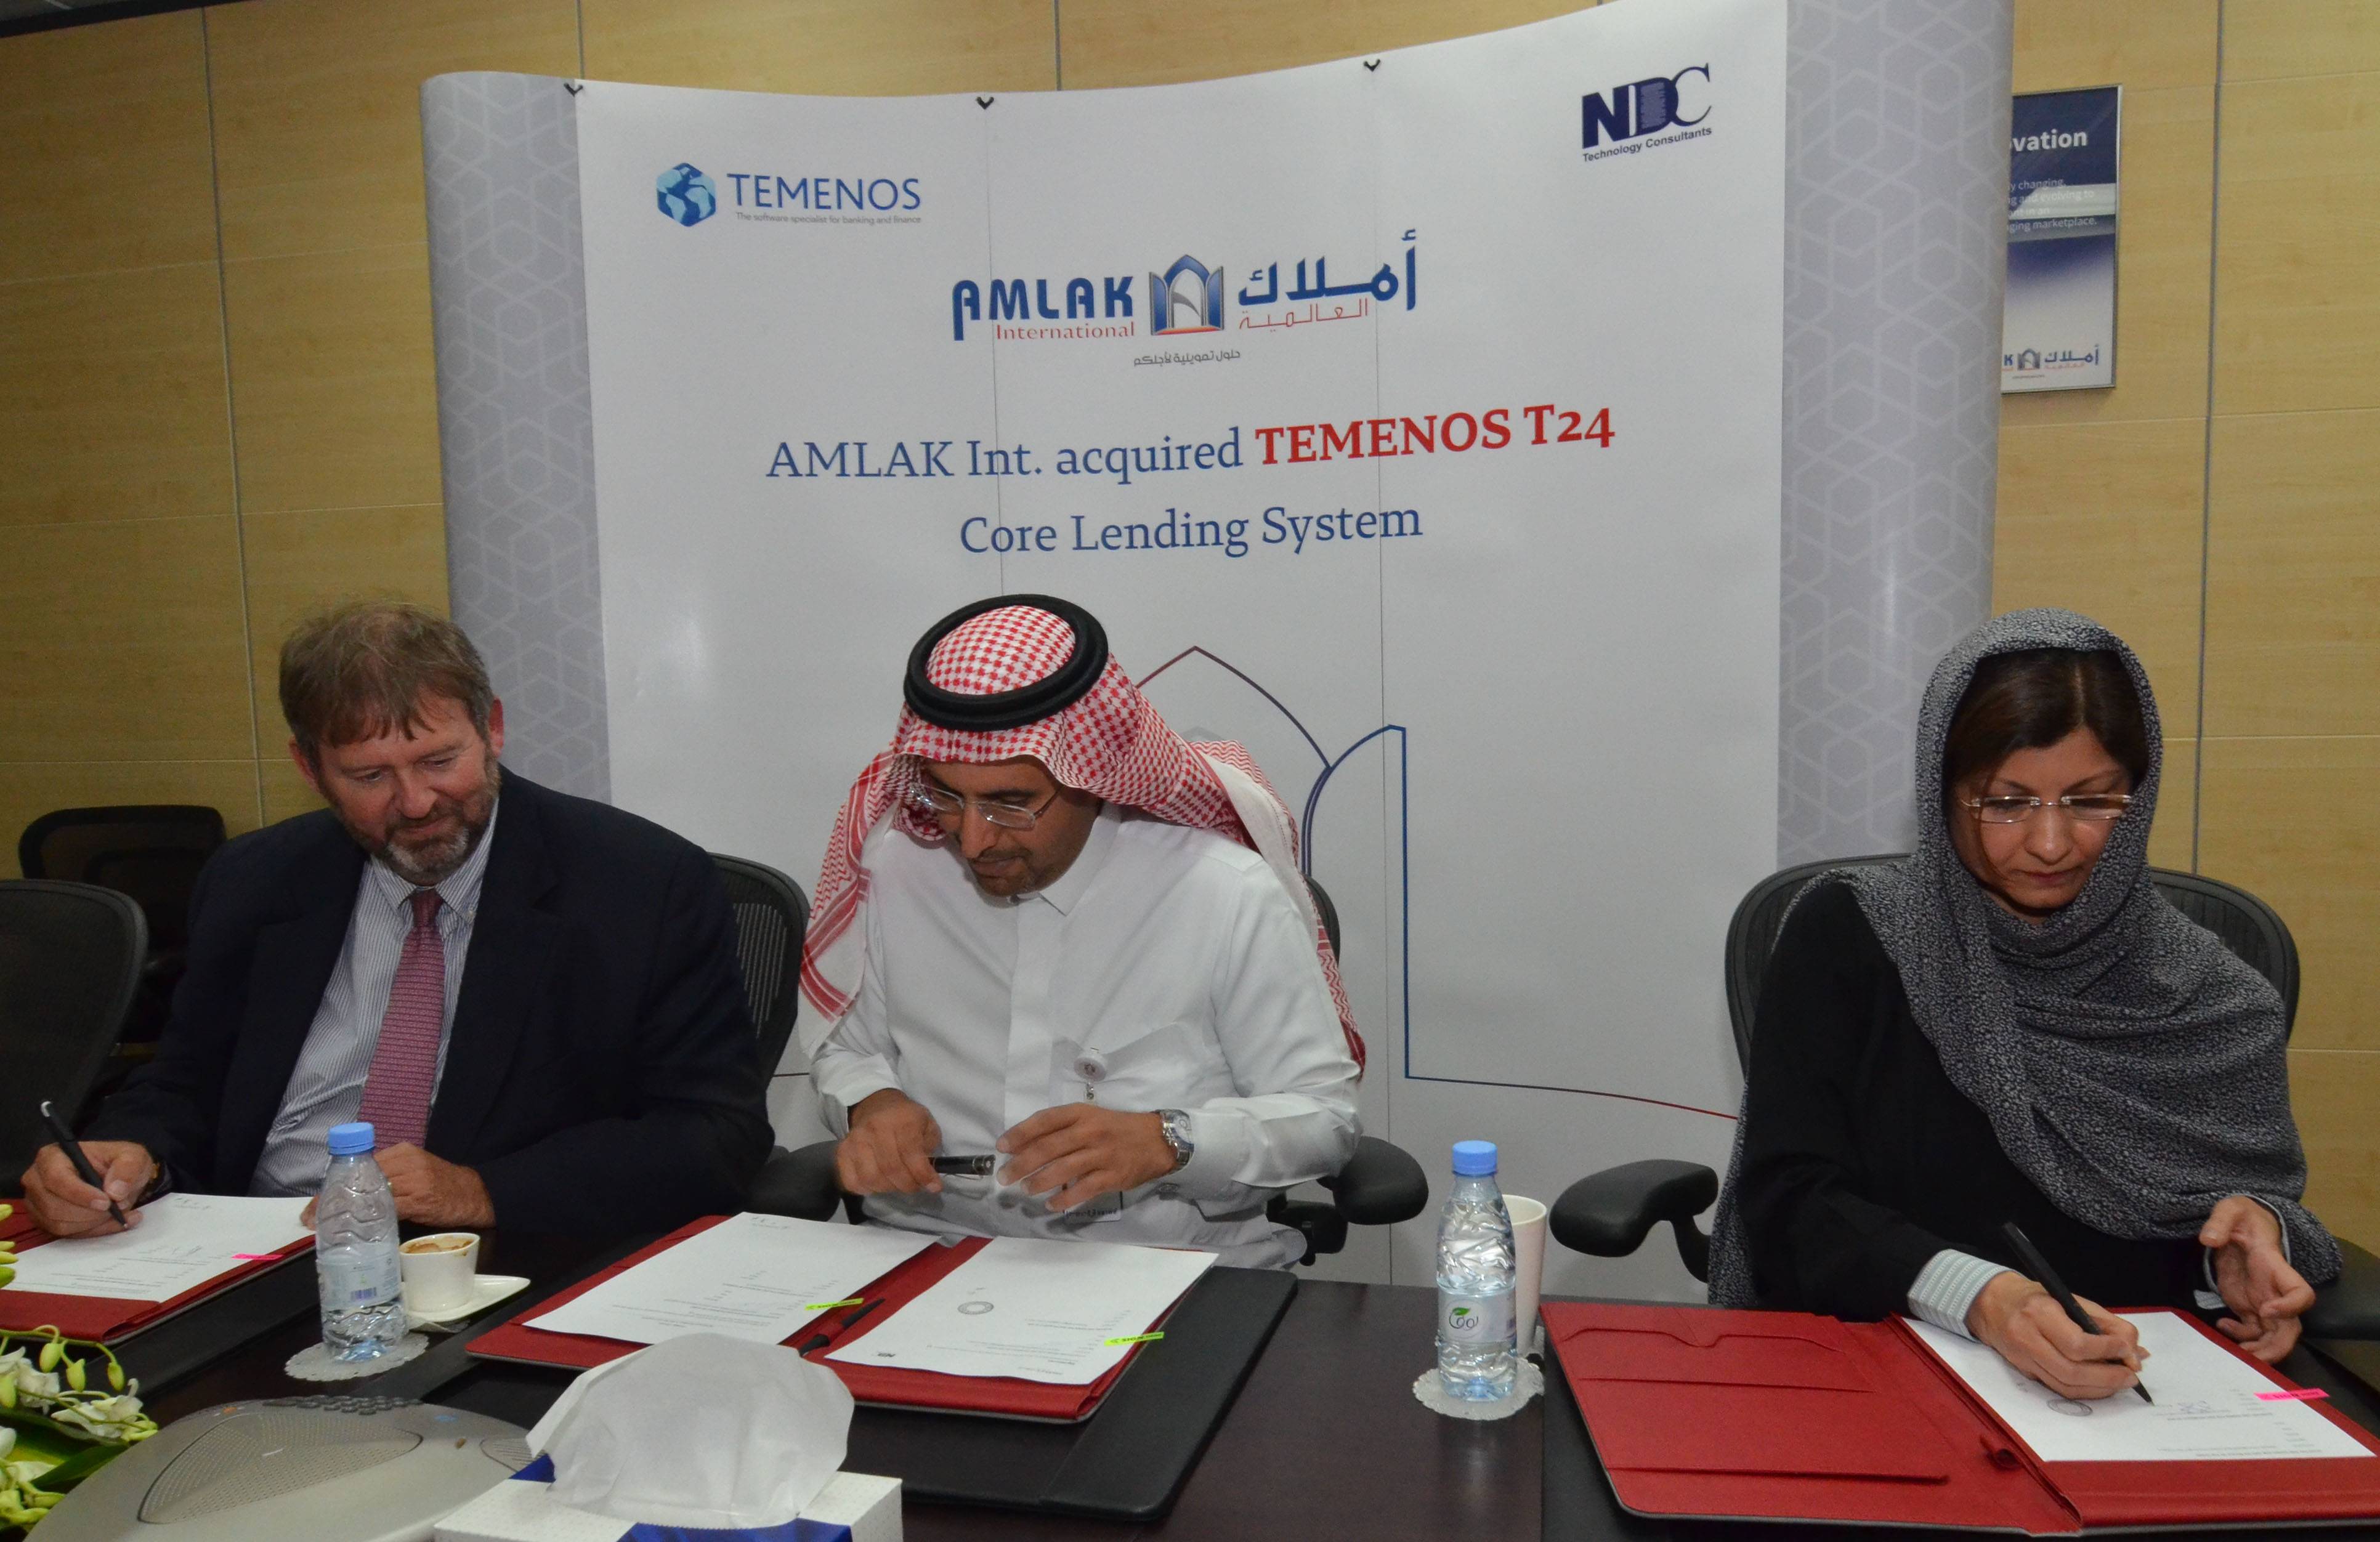 Amlak International adopts the latest digital lending systems in partnership with Temenos and National Data Consultant (NDC)